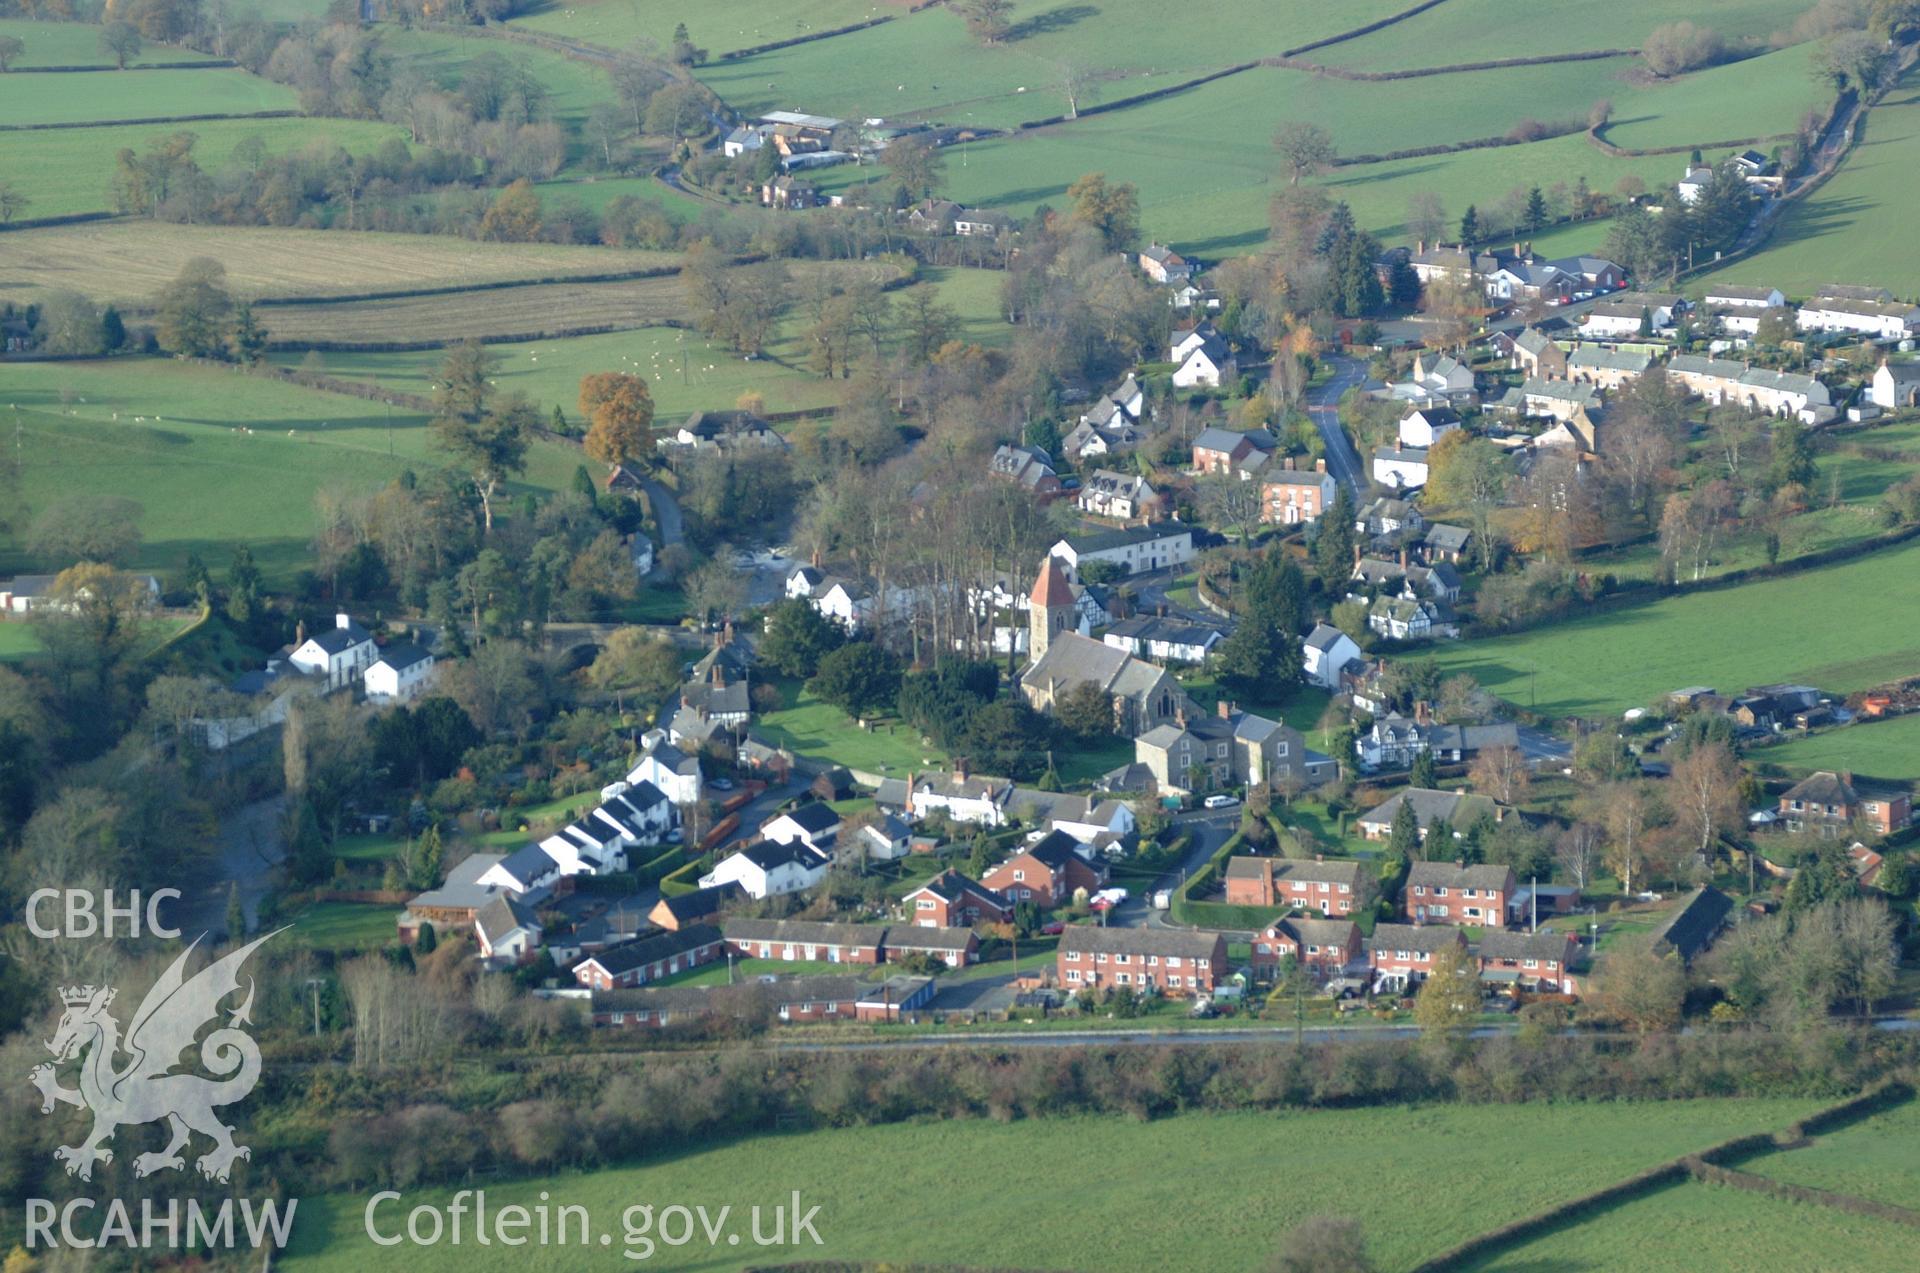 RCAHMW colour oblique aerial photograph of St Beuno's Church, Berriew Village, viewed from the south-east. Taken on 19 November 2004 by Toby Driver